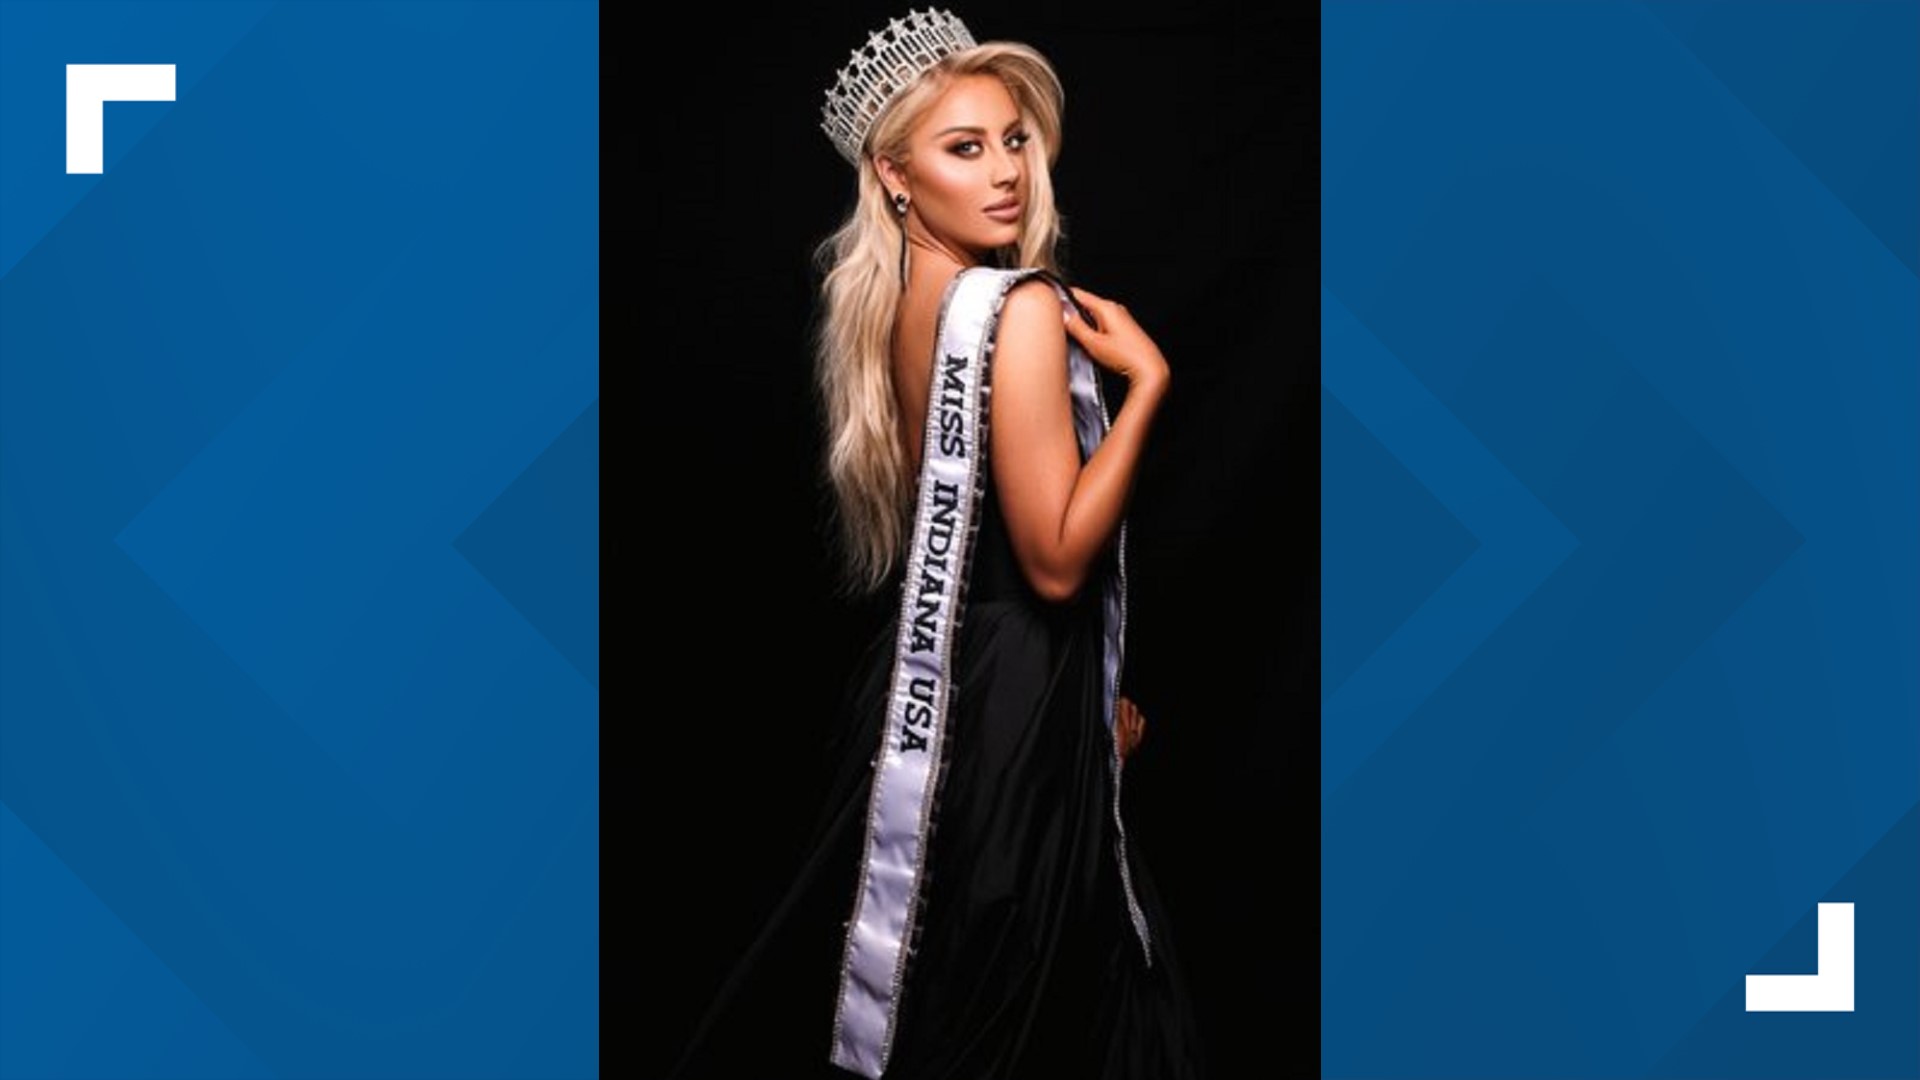 Samantha Toney finished as first runner-up for three consecutive years before bringing home the title of Miss Indiana USA in April 2022.